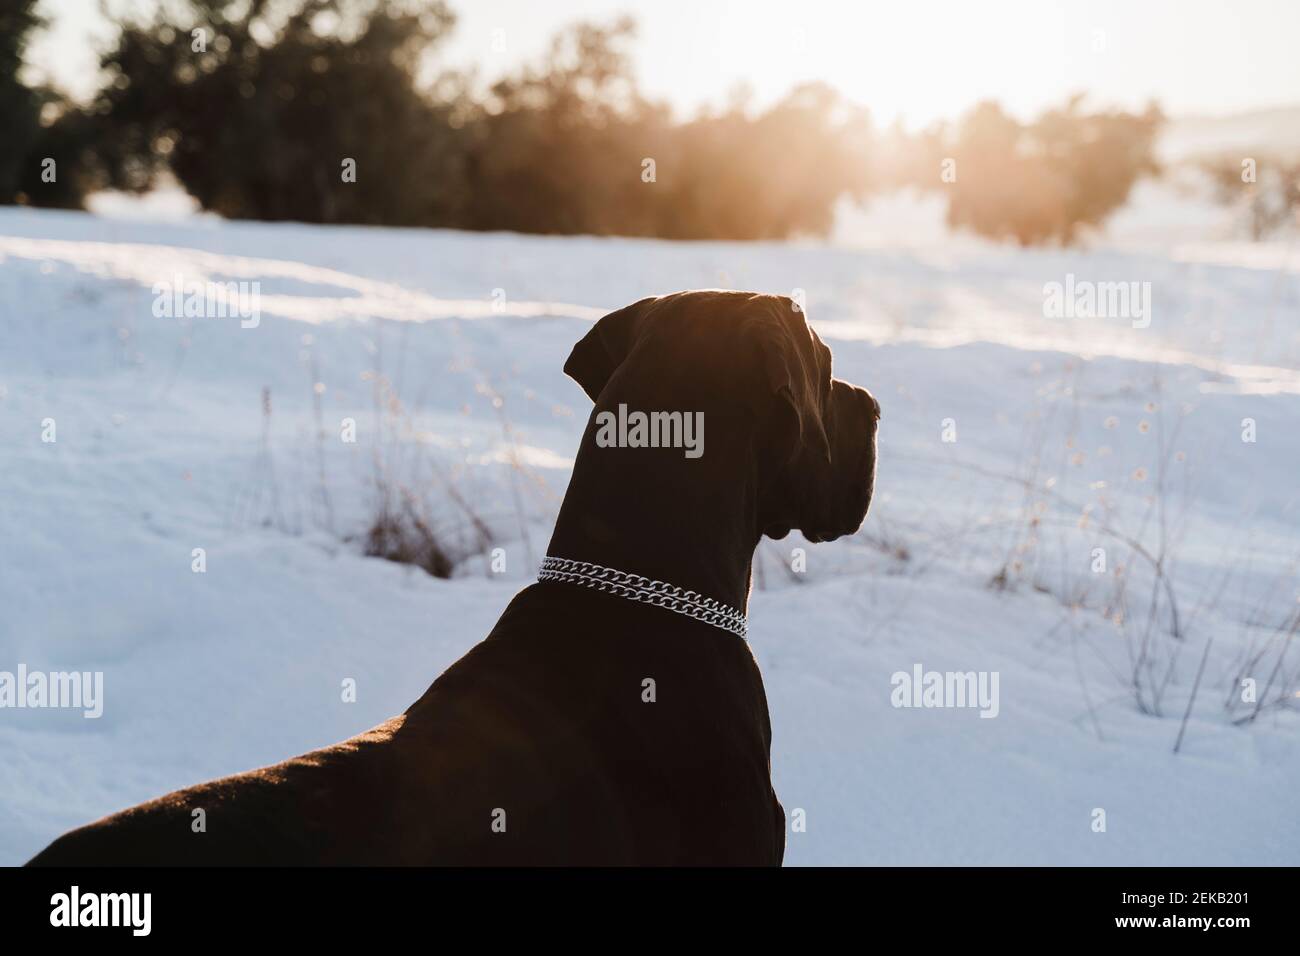 Black great Dane dog looking away in snow during sunset Stock Photo